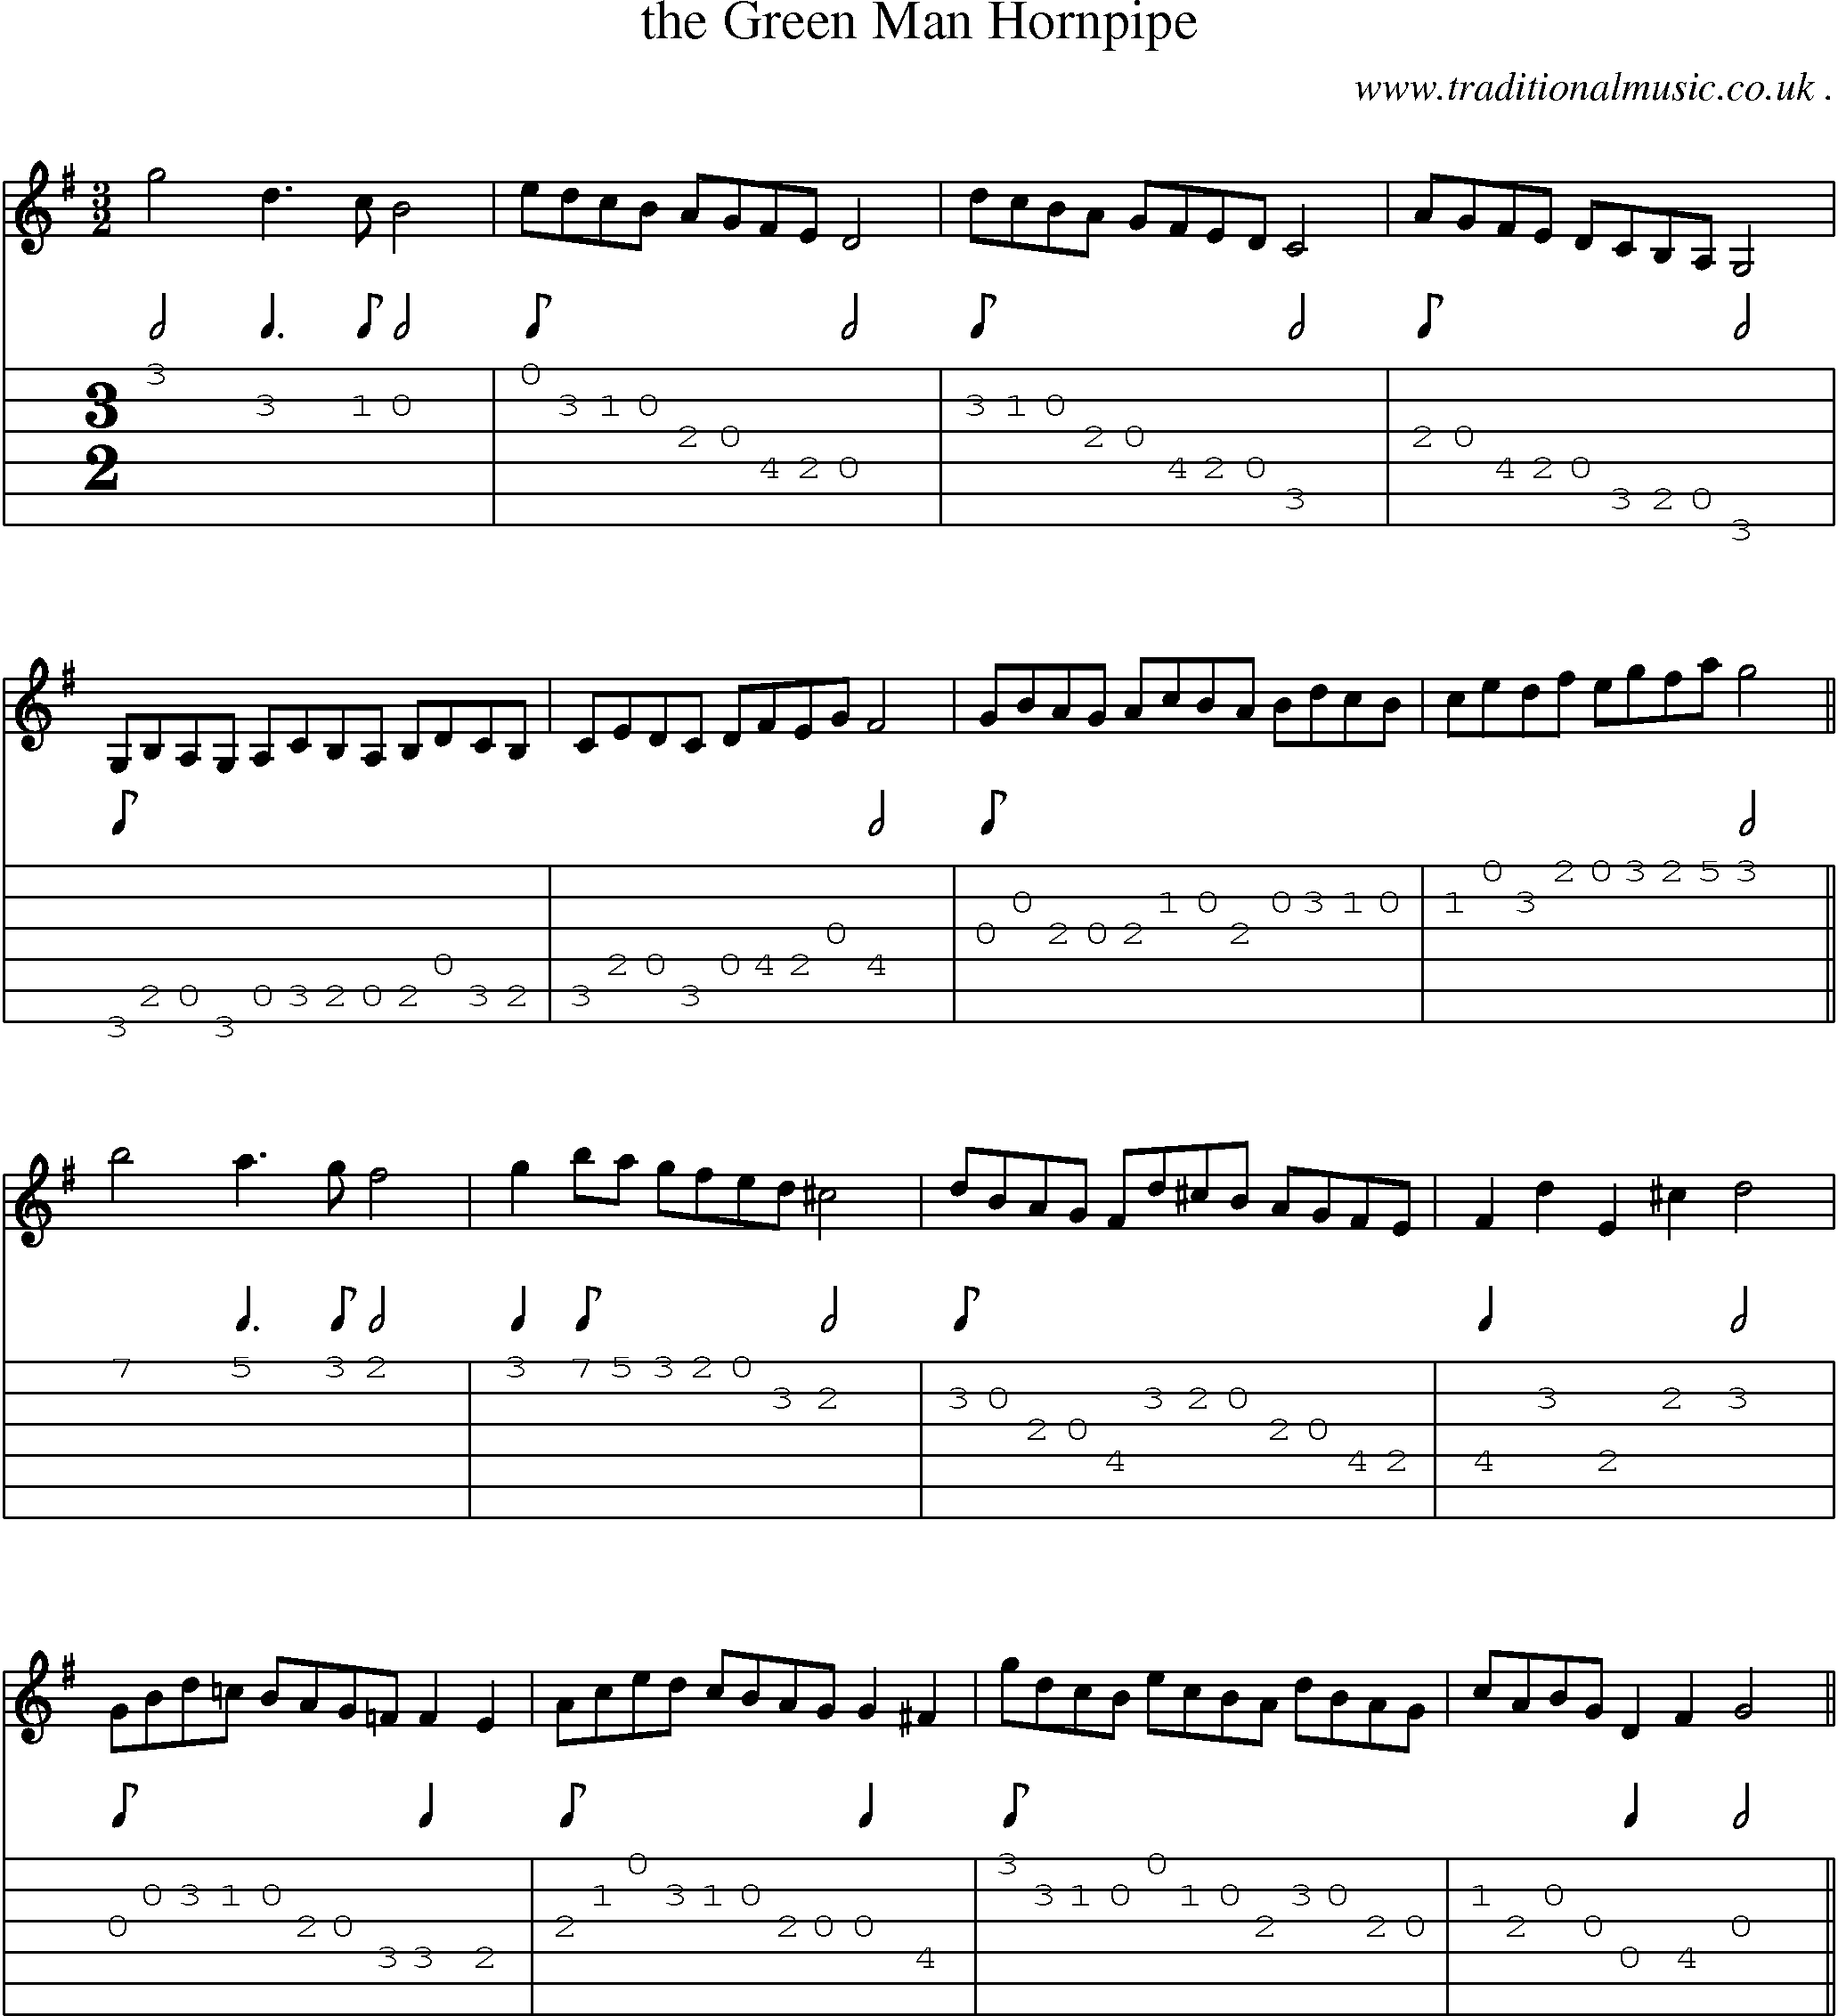 Sheet-Music and Guitar Tabs for The Green Man Hornpipe